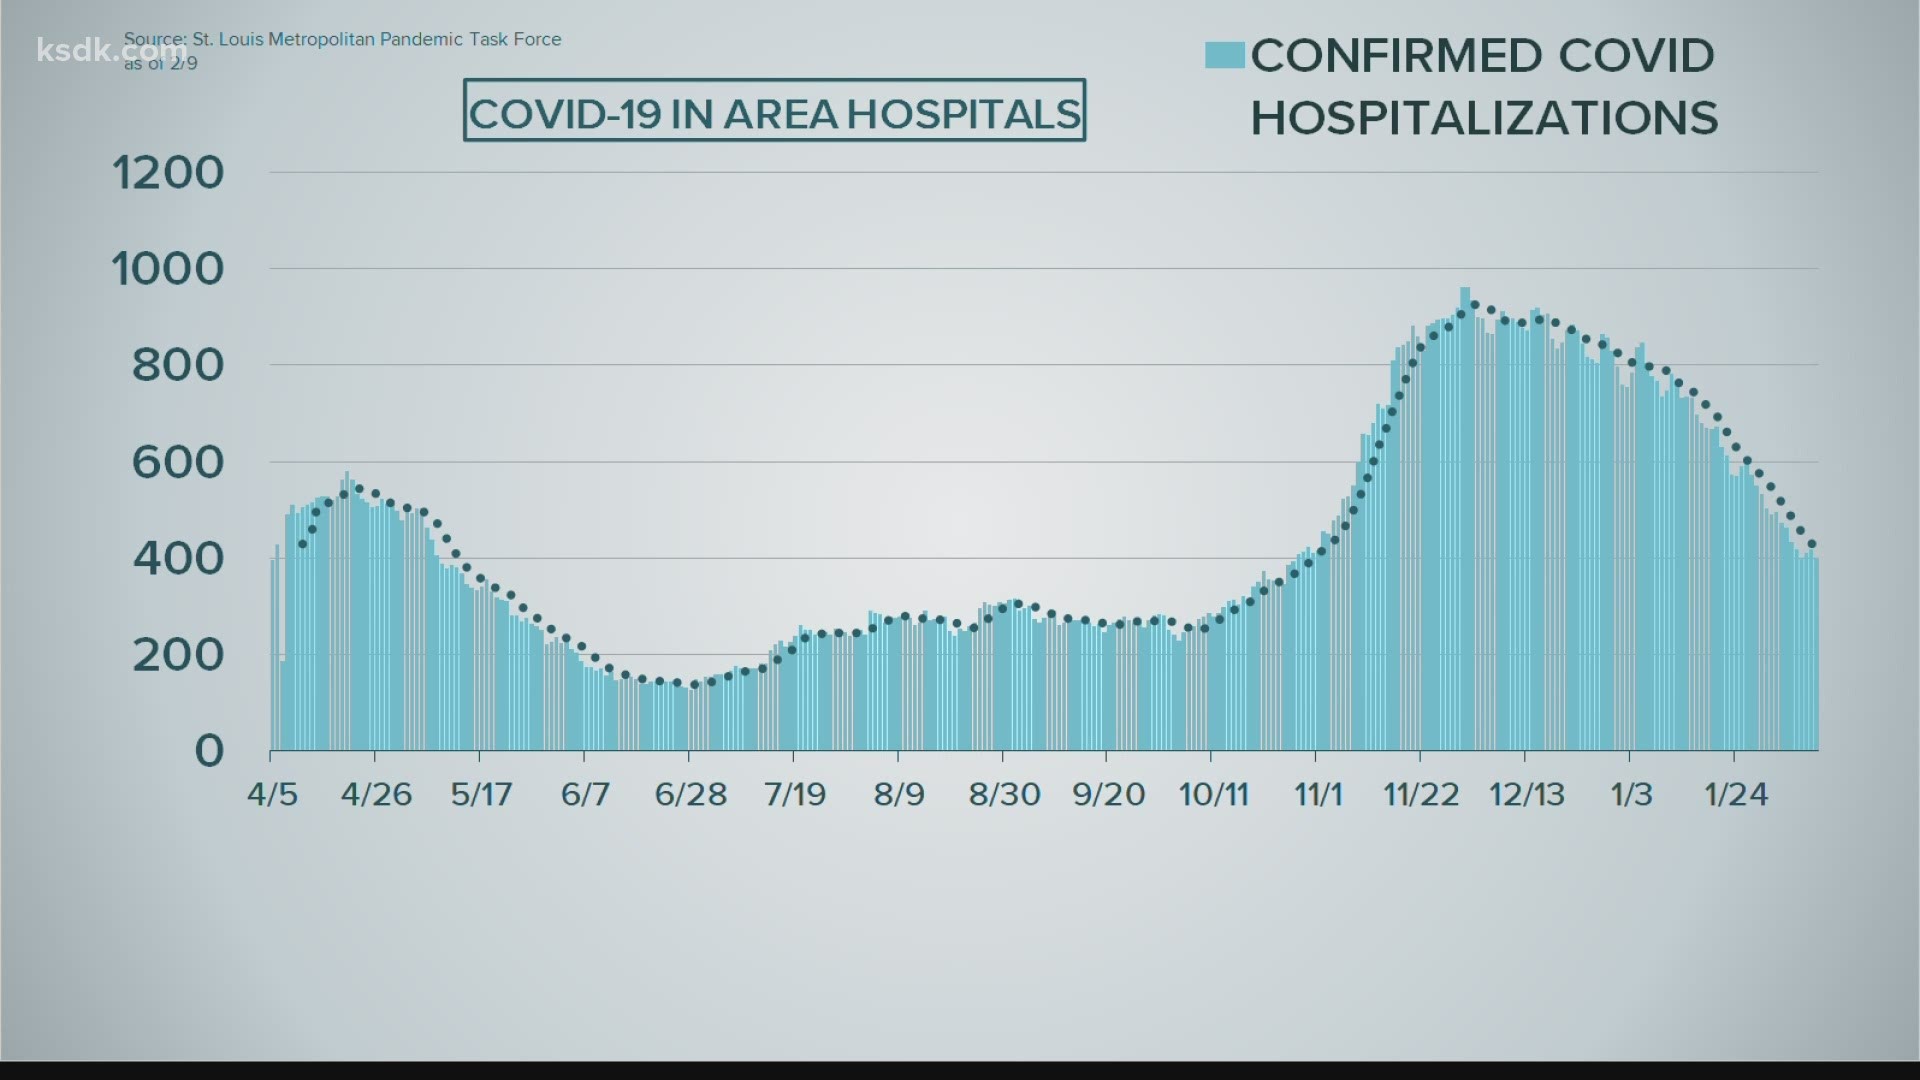 Hospitalizations have decreased since peaking on Dec. 1.